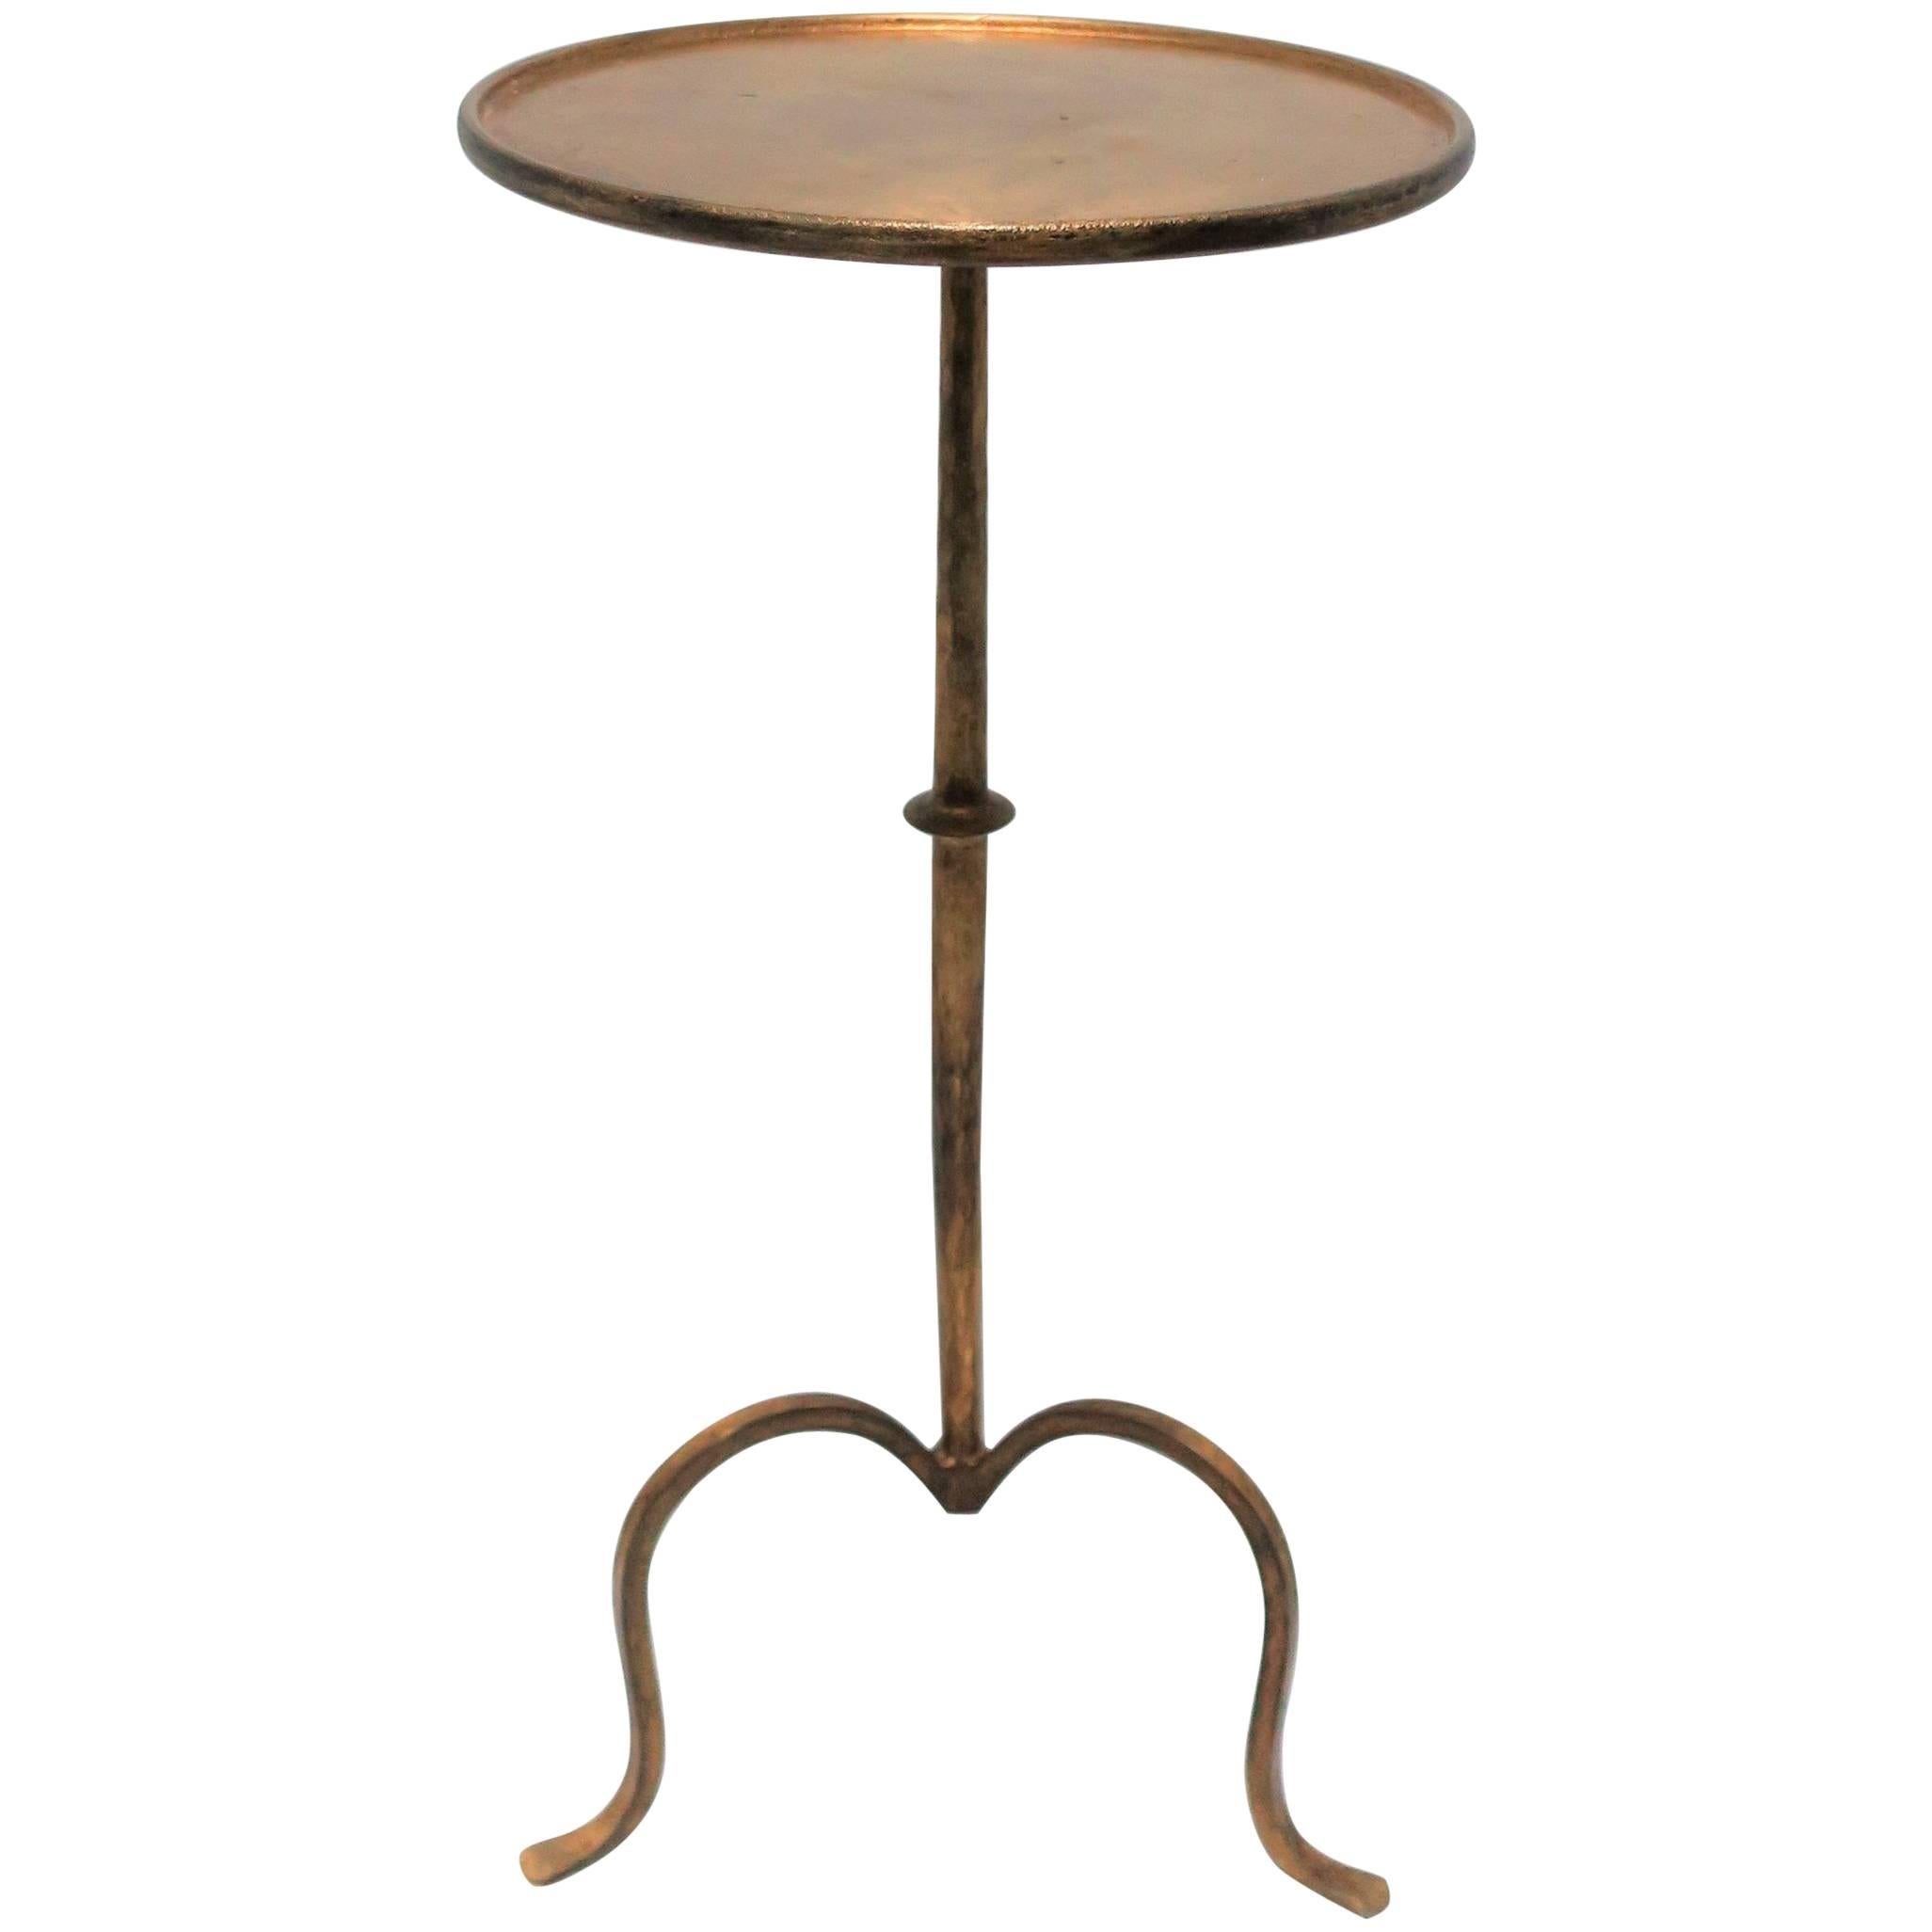 Gold Gilt Round Side Table with Tri-Pod Base, 21st Century